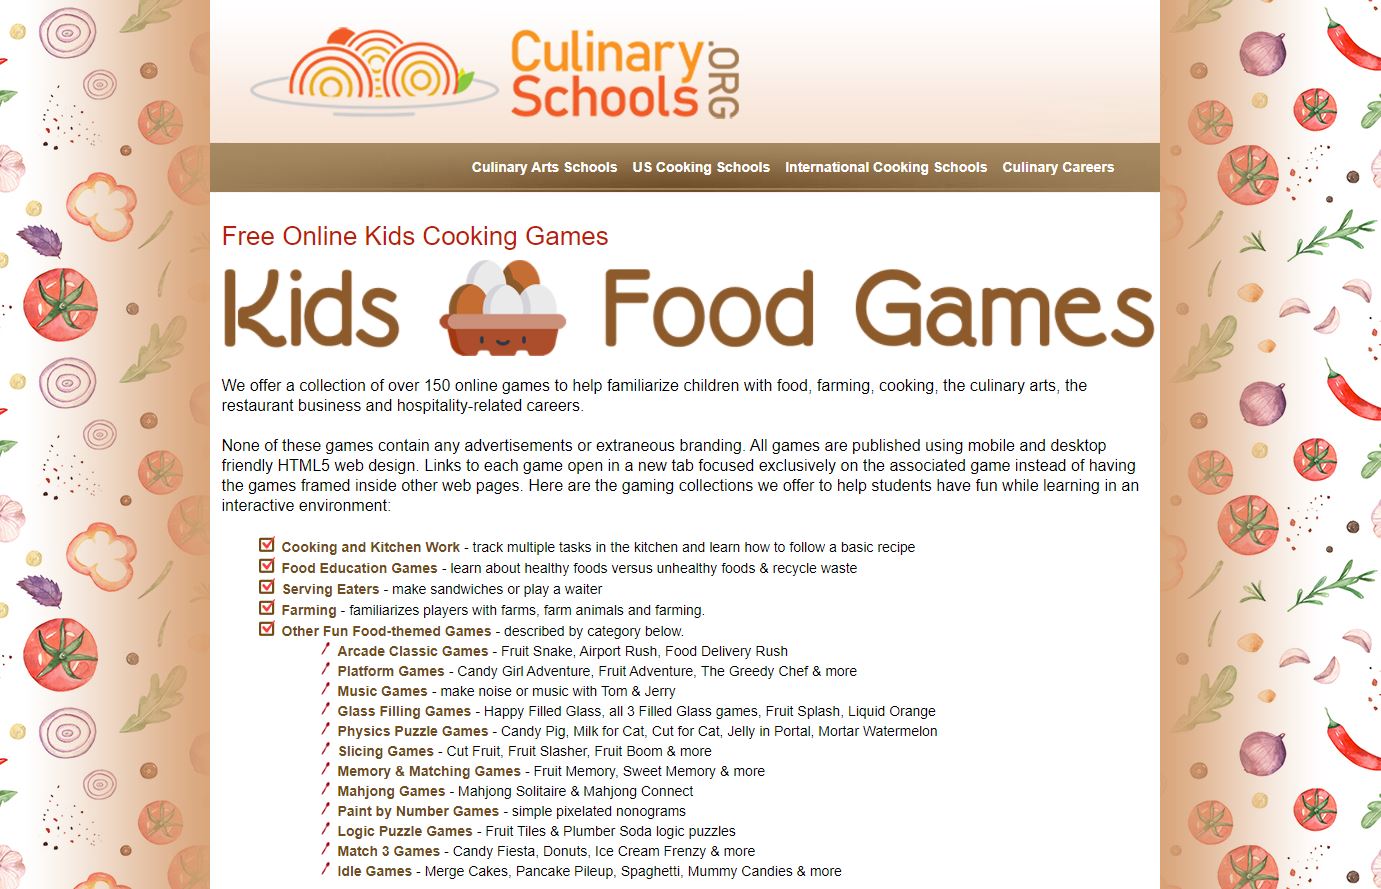 FREE Online Cooking Games for Kids at CulinarySchools.Org